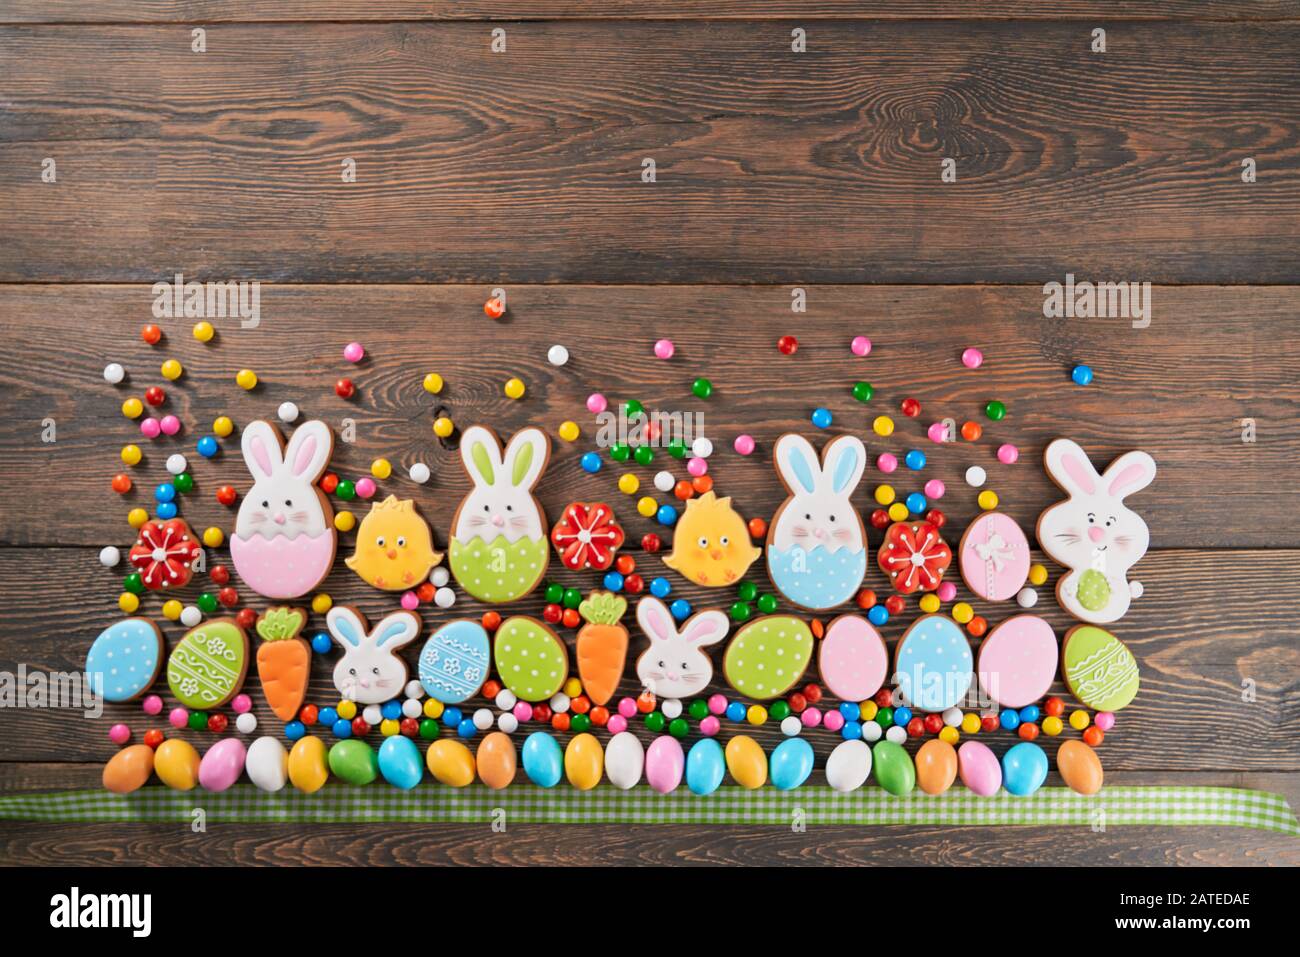 Big and small colorful peanut chocolate balls in crispy sugar shell and tartan ribbon isolated on wooden background. Easter ginger glazed cookies in shape of bunnies, flowers, carrots and eggs in row. Stock Photo